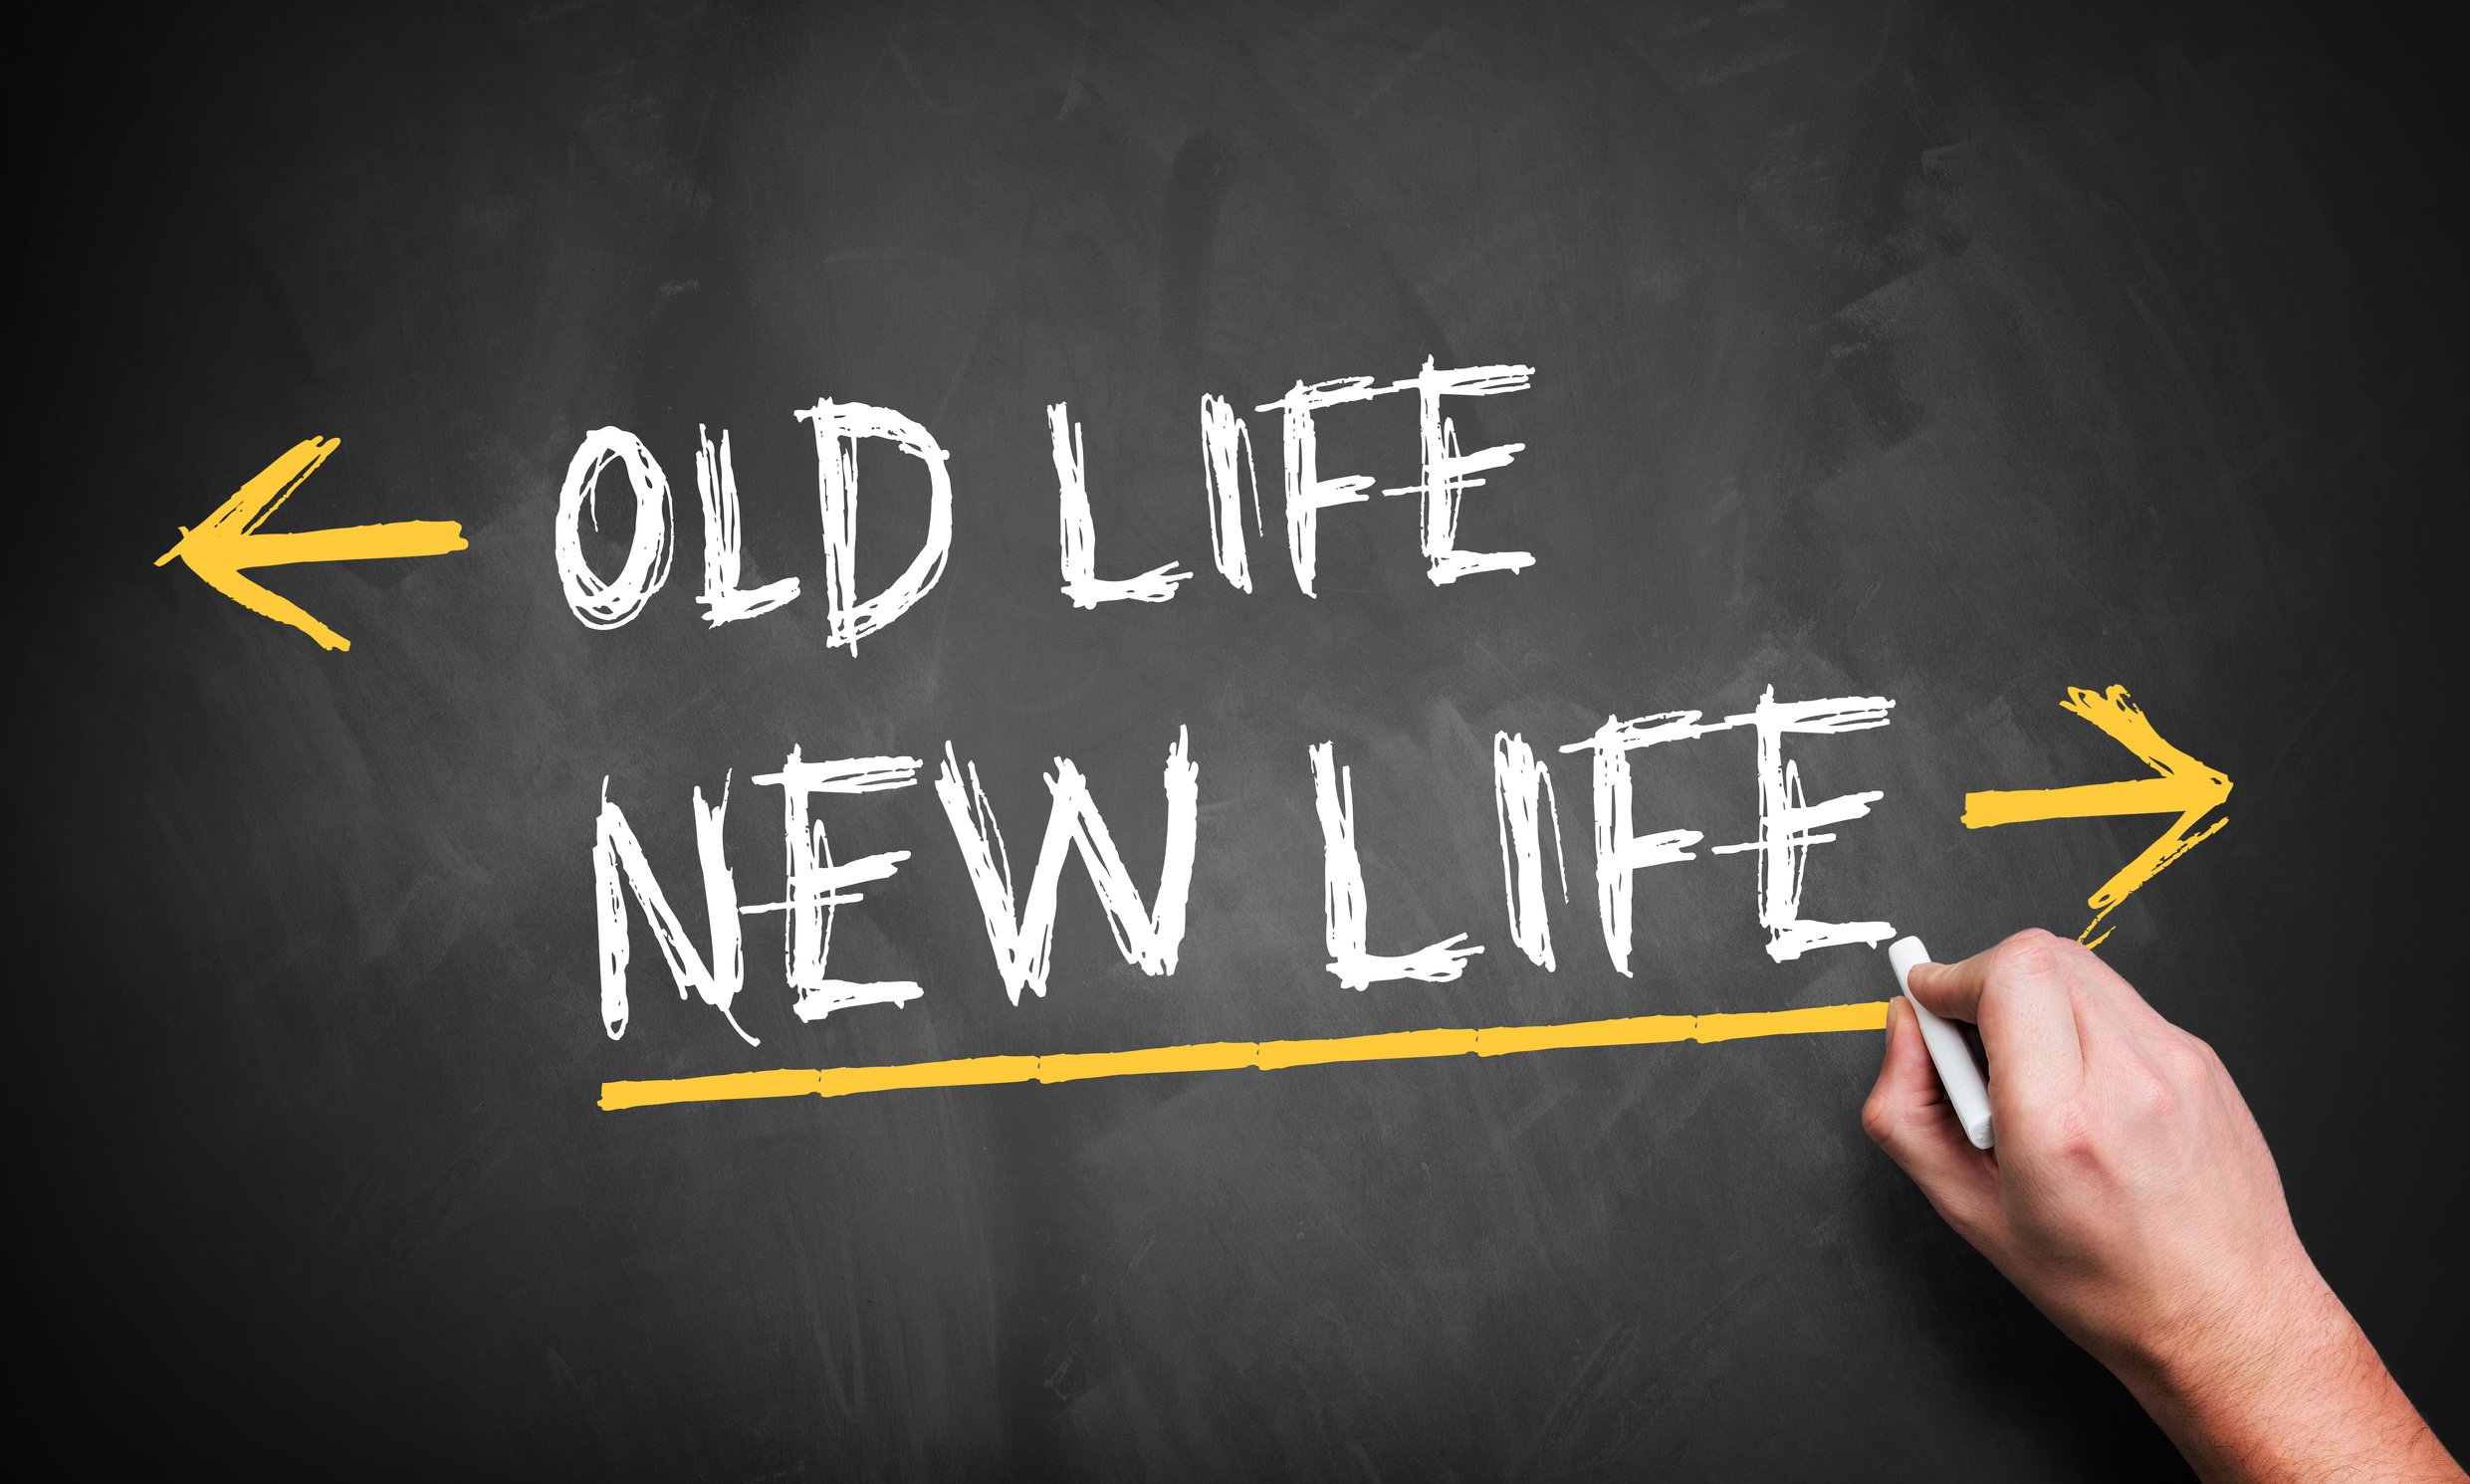 Give a new life. Old Life. The New Life. New Life картинки. New Life надпись.